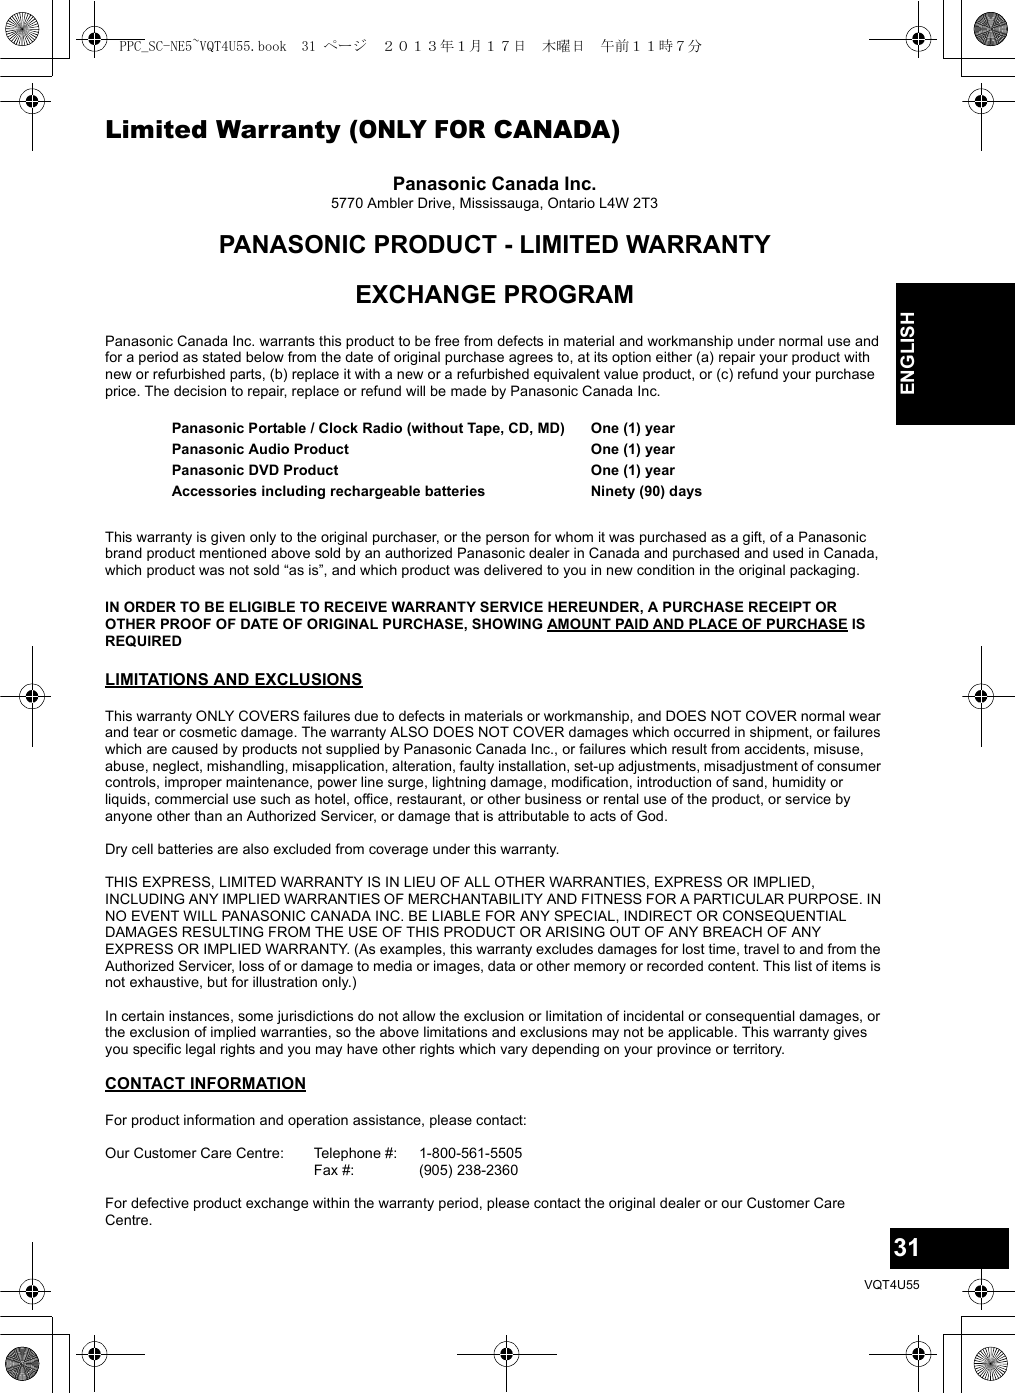 31VQT4U55ENGLISHLimited Warranty (ONLY FOR CANADA)Panasonic Canada Inc.5770 Ambler Drive, Mississauga, Ontario L4W 2T3PANASONIC PRODUCT - LIMITED WARRANTYEXCHANGE PROGRAMPanasonic Canada Inc. warrants this product to be free from defects in material and workmanship under normal use and for a period as stated below from the date of original purchase agrees to, at its option either (a) repair your product with new or refurbished parts, (b) replace it with a new or a refurbished equivalent value product, or (c) refund your purchase price. The decision to repair, replace or refund will be made by Panasonic Canada Inc.This warranty is given only to the original purchaser, or the person for whom it was purchased as a gift, of a Panasonic brand product mentioned above sold by an authorized Panasonic dealer in Canada and purchased and used in Canada, which product was not sold “as is”, and which product was delivered to you in new condition in the original packaging.IN ORDER TO BE ELIGIBLE TO RECEIVE WARRANTY SERVICE HEREUNDER, A PURCHASE RECEIPT OR OTHER PROOF OF DATE OF ORIGINAL PURCHASE, SHOWING AMOUNT PAID AND PLACE OF PURCHASE IS REQUIRED LIMITATIONS AND EXCLUSIONSThis warranty ONLY COVERS failures due to defects in materials or workmanship, and DOES NOT COVER normal wear and tear or cosmetic damage. The warranty ALSO DOES NOT COVER damages which occurred in shipment, or failures which are caused by products not supplied by Panasonic Canada Inc., or failures which result from accidents, misuse, abuse, neglect, mishandling, misapplication, alteration, faulty installation, set-up adjustments, misadjustment of consumer controls, improper maintenance, power line surge, lightning damage, modification, introduction of sand, humidity or liquids, commercial use such as hotel, office, restaurant, or other business or rental use of the product, or service by anyone other than an Authorized Servicer, or damage that is attributable to acts of God.Dry cell batteries are also excluded from coverage under this warranty.THIS EXPRESS, LIMITED WARRANTY IS IN LIEU OF ALL OTHER WARRANTIES, EXPRESS OR IMPLIED, INCLUDING ANY IMPLIED WARRANTIES OF MERCHANTABILITY AND FITNESS FOR A PARTICULAR PURPOSE. IN NO EVENT WILL PANASONIC CANADA INC. BE LIABLE FOR ANY SPECIAL, INDIRECT OR CONSEQUENTIAL DAMAGES RESULTING FROM THE USE OF THIS PRODUCT OR ARISING OUT OF ANY BREACH OF ANY EXPRESS OR IMPLIED WARRANTY. (As examples, this warranty excludes damages for lost time, travel to and from the Authorized Servicer, loss of or damage to media or images, data or other memory or recorded content. This list of items is not exhaustive, but for illustration only.)In certain instances, some jurisdictions do not allow the exclusion or limitation of incidental or consequential damages, or the exclusion of implied warranties, so the above limitations and exclusions may not be applicable. This warranty gives you specific legal rights and you may have other rights which vary depending on your province or territory.CONTACT INFORMATIONPanasonic Portable / Clock Radio (without Tape, CD, MD)Panasonic Audio ProductPanasonic DVD ProductAccessories including rechargeable batteriesOne (1) yearOne (1) yearOne (1) yearNinety (90) daysFor product information and operation assistance, please contact:Our Customer Care Centre: Telephone #:Fax #:1-800-561-5505(905) 238-2360For defective product exchange within the warranty period, please contact the original dealer or our Customer Care Centre.PPC_SC-NE5~VQT4U55.book  31 ページ  ２０１３年１月１７日　木曜日　午前１１時７分